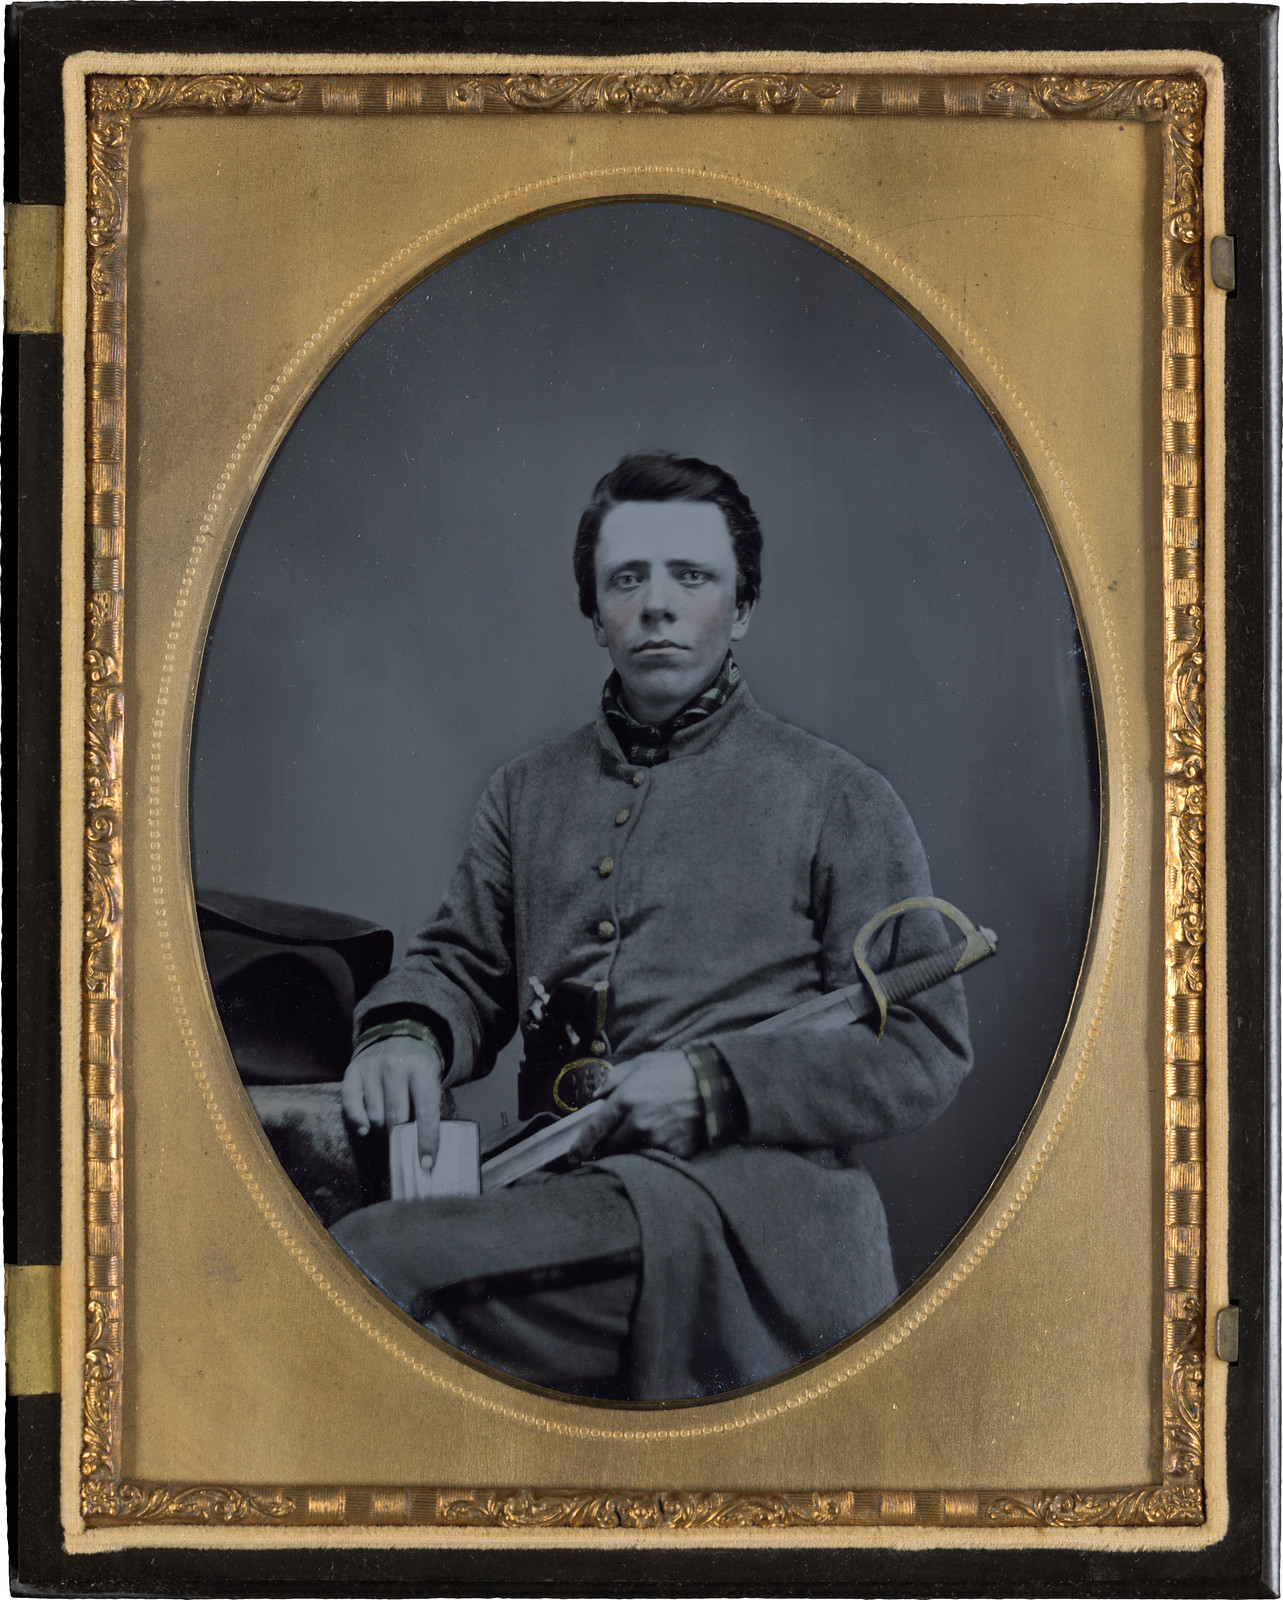 Private W.R. Clack of Co. B, 43rd Tennessee Infantry Regiment, with saber, pistol, and small book